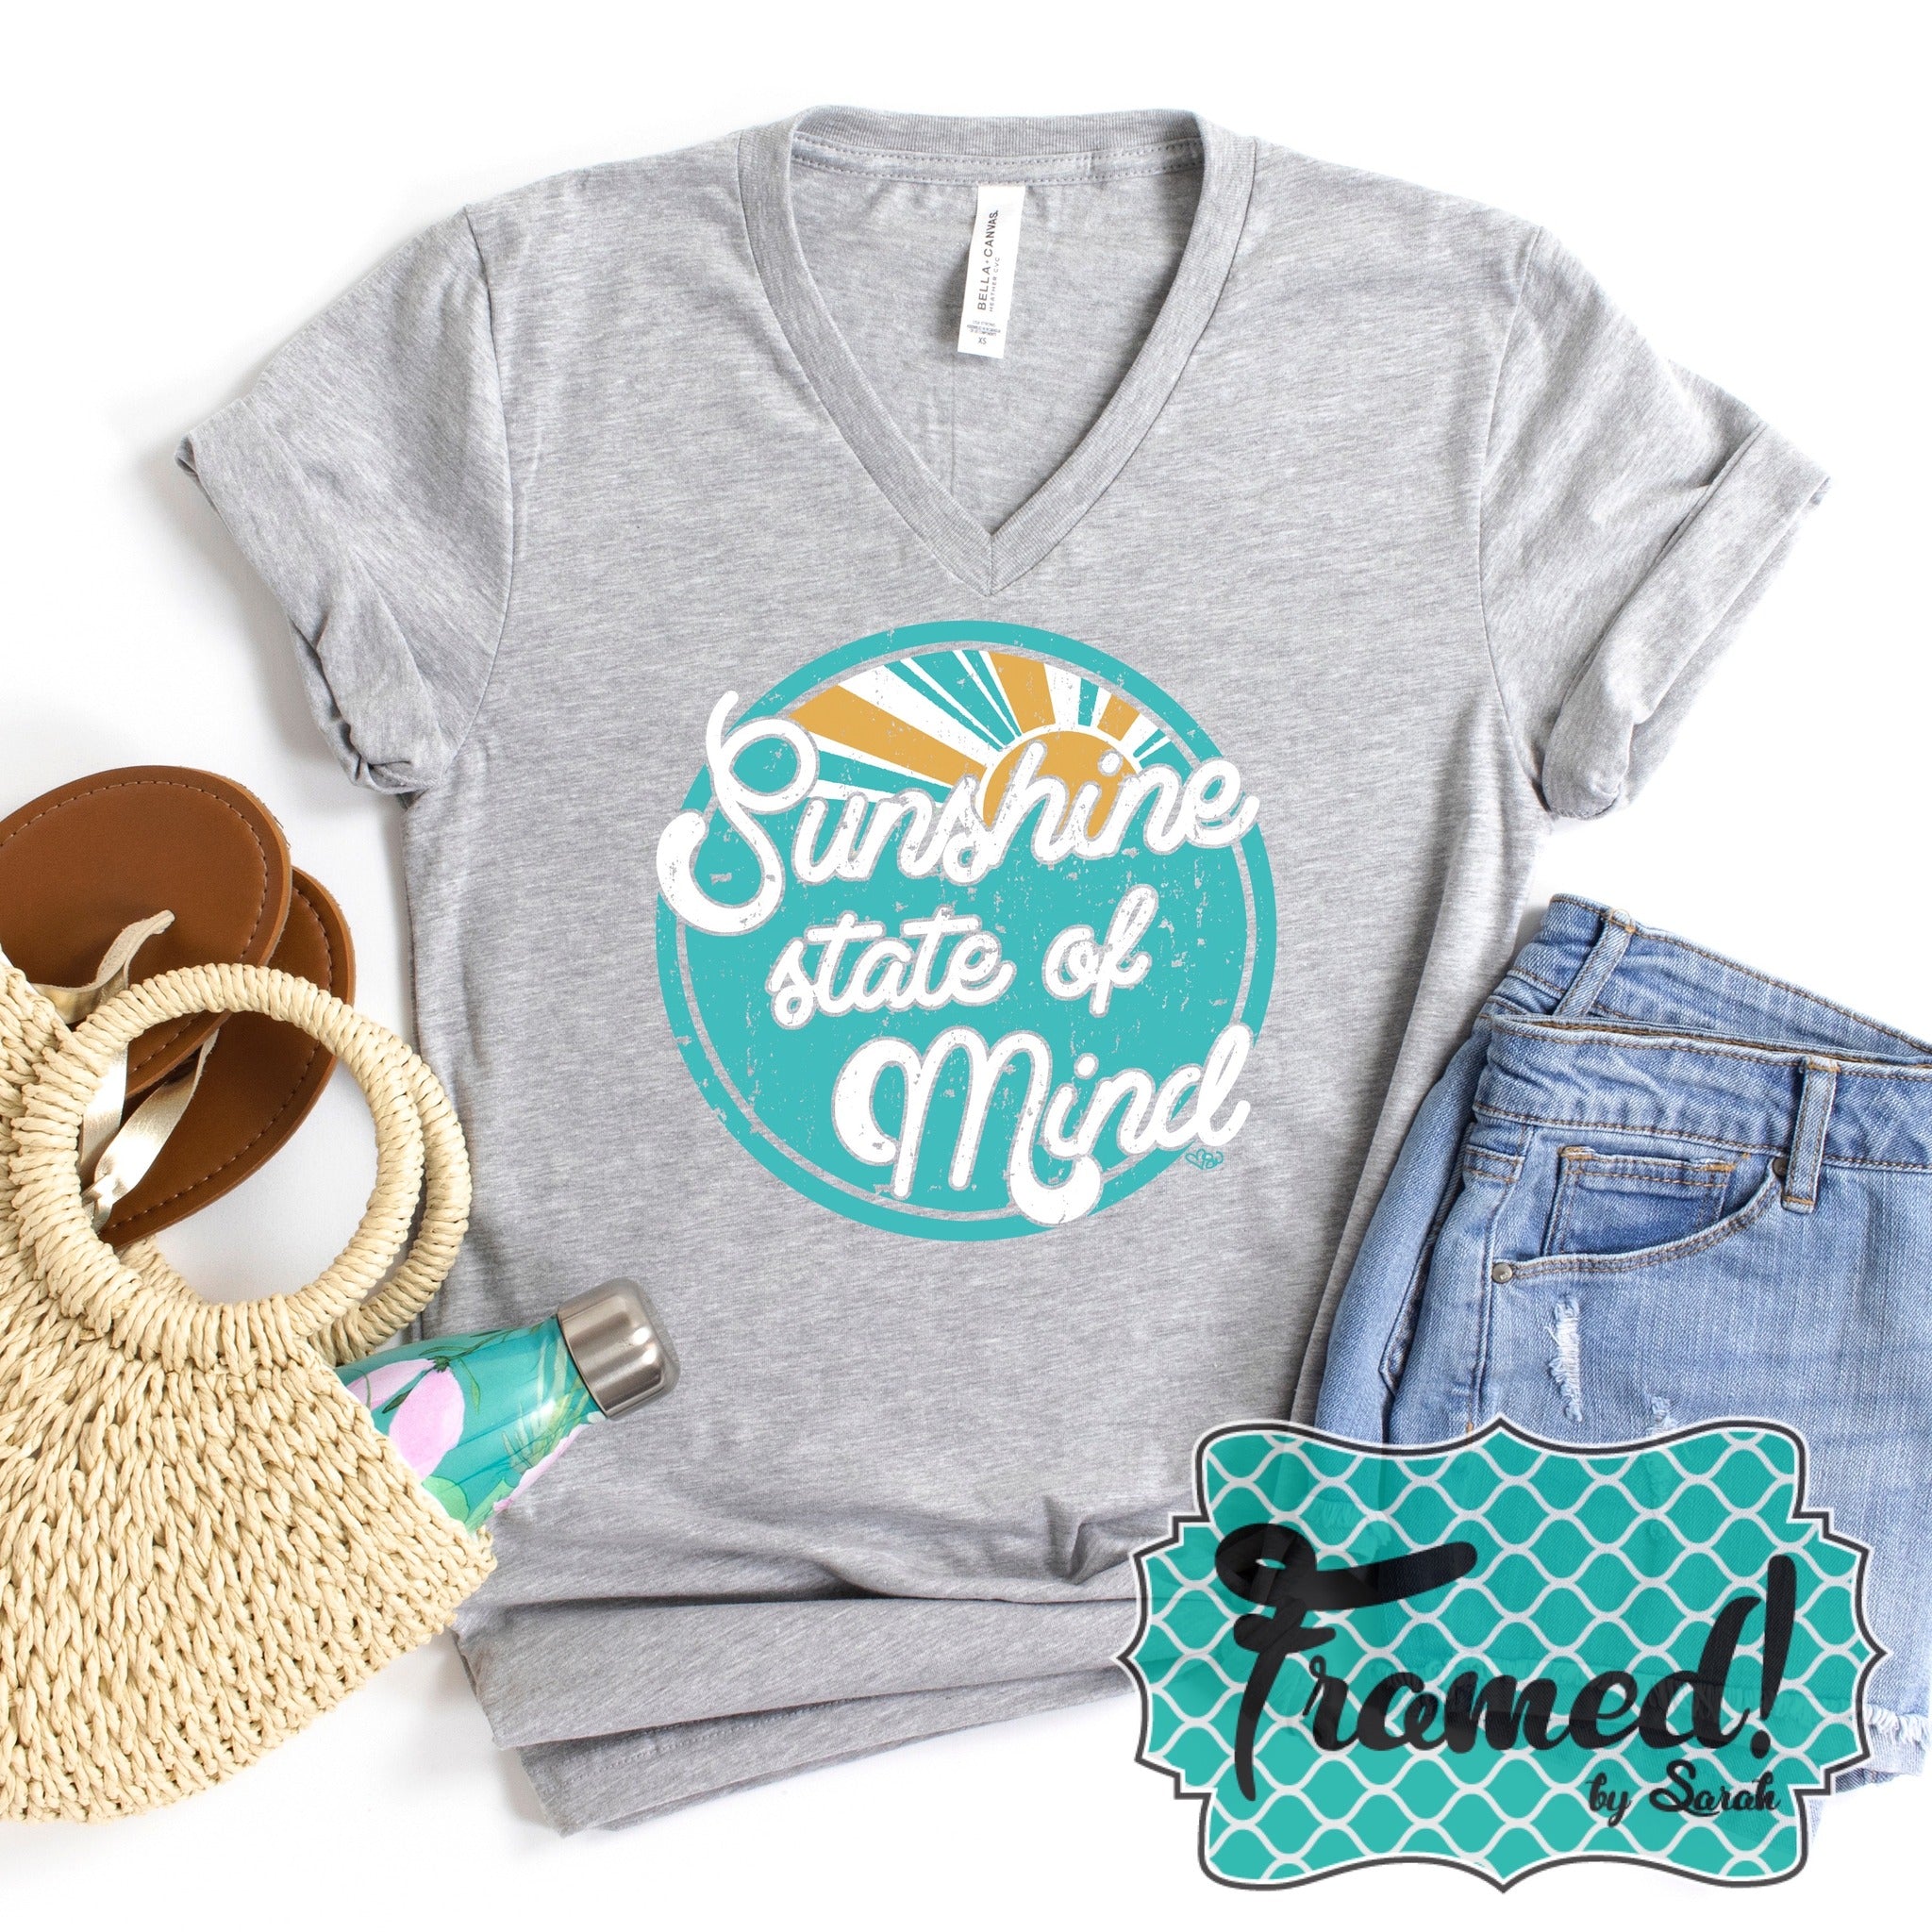 Sunshine State of Mind Tee (Small Only)